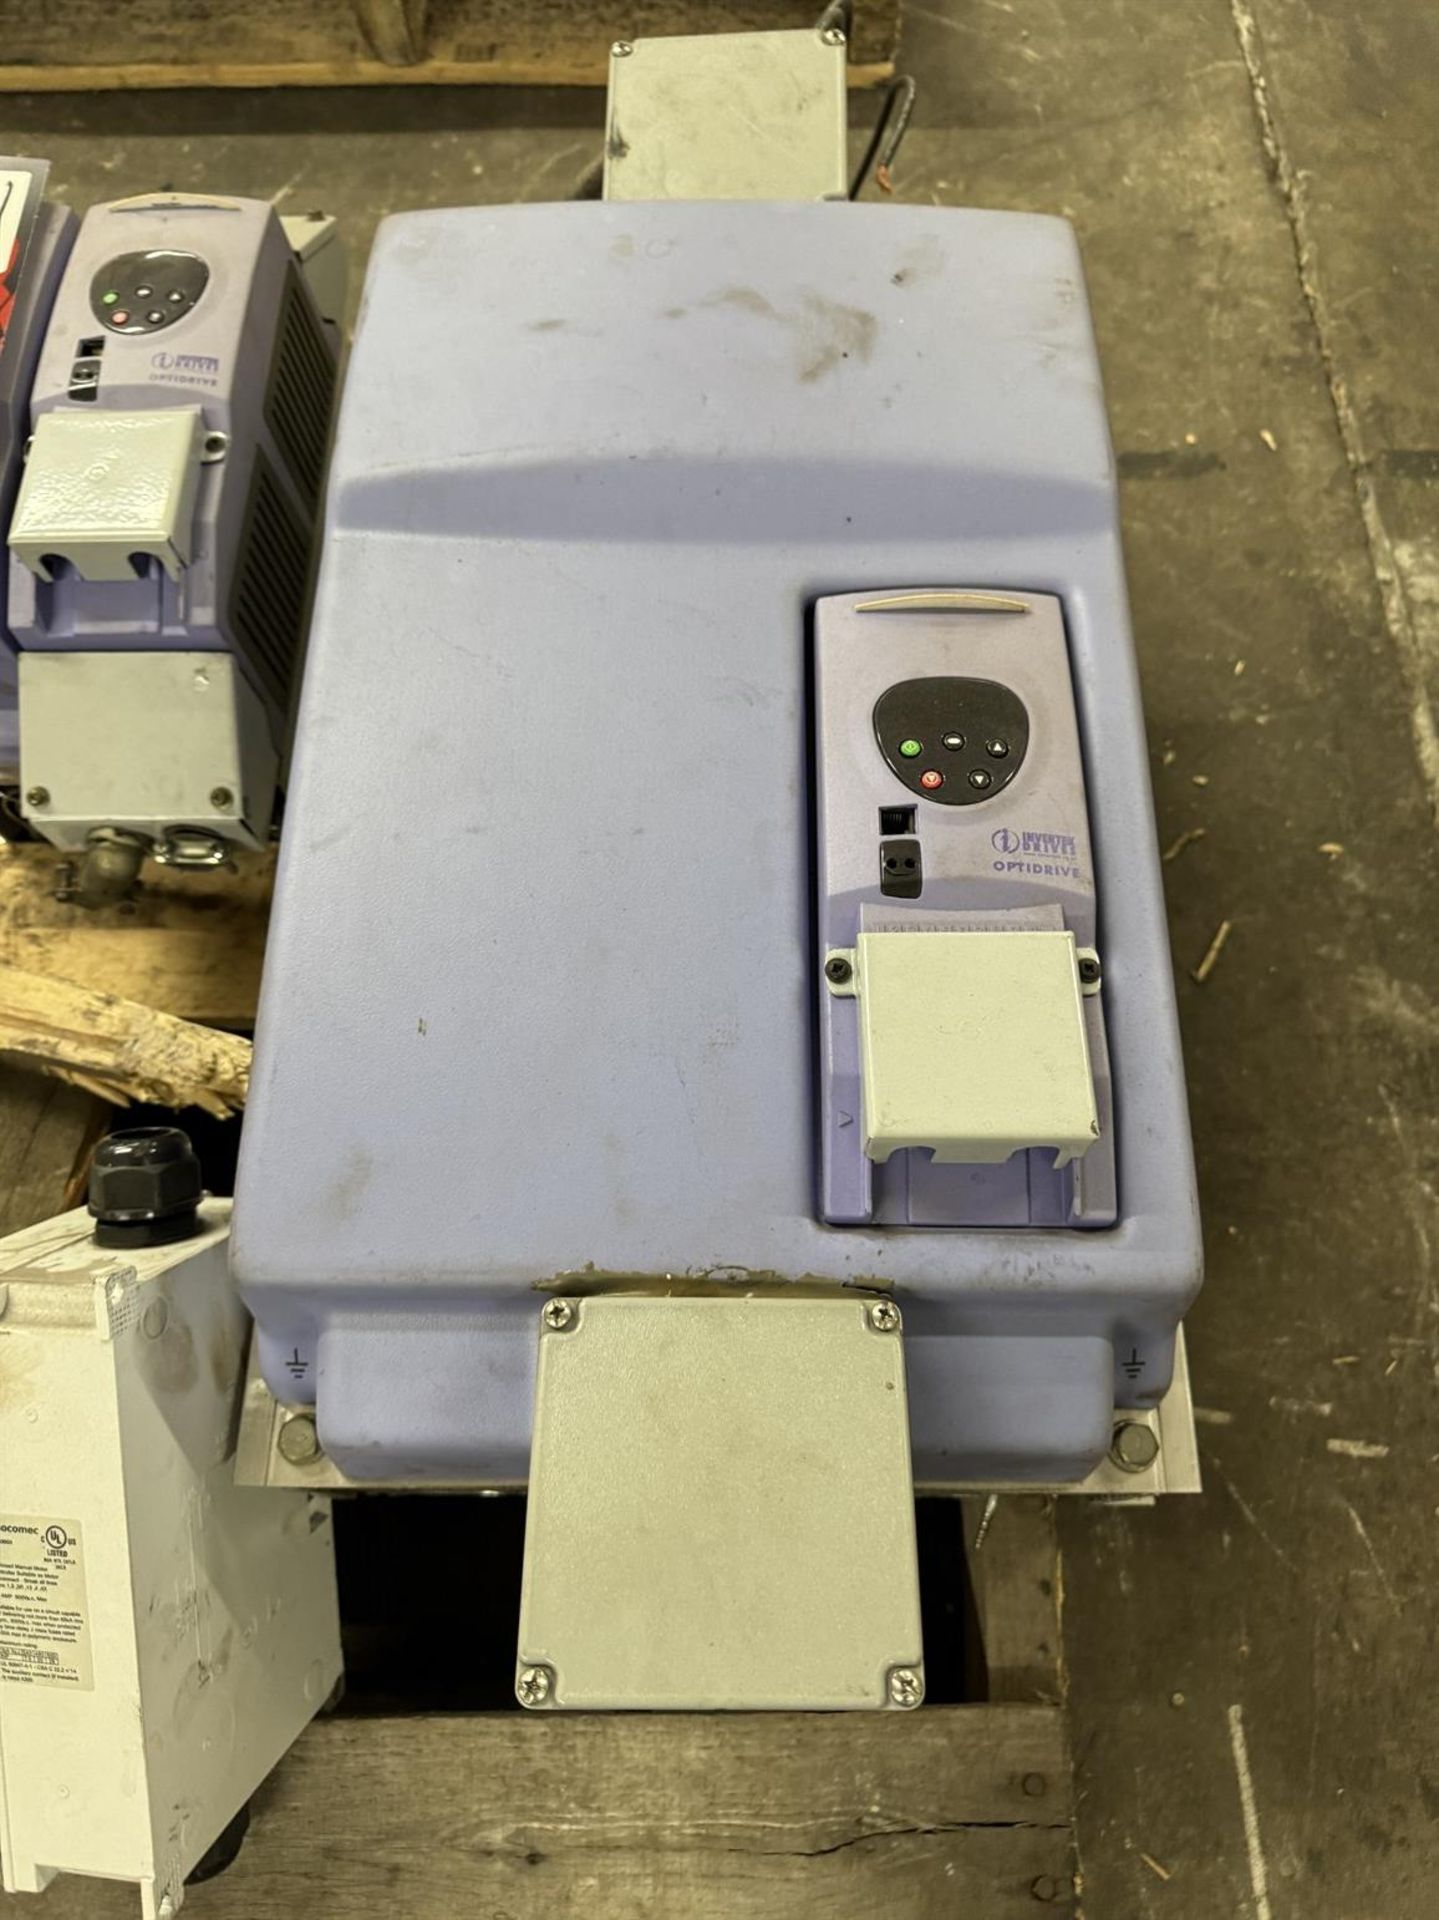 Lot Comprising 30 HP Optidrive Plus ODP-44300-US Drive and Speed Control - Image 4 of 7